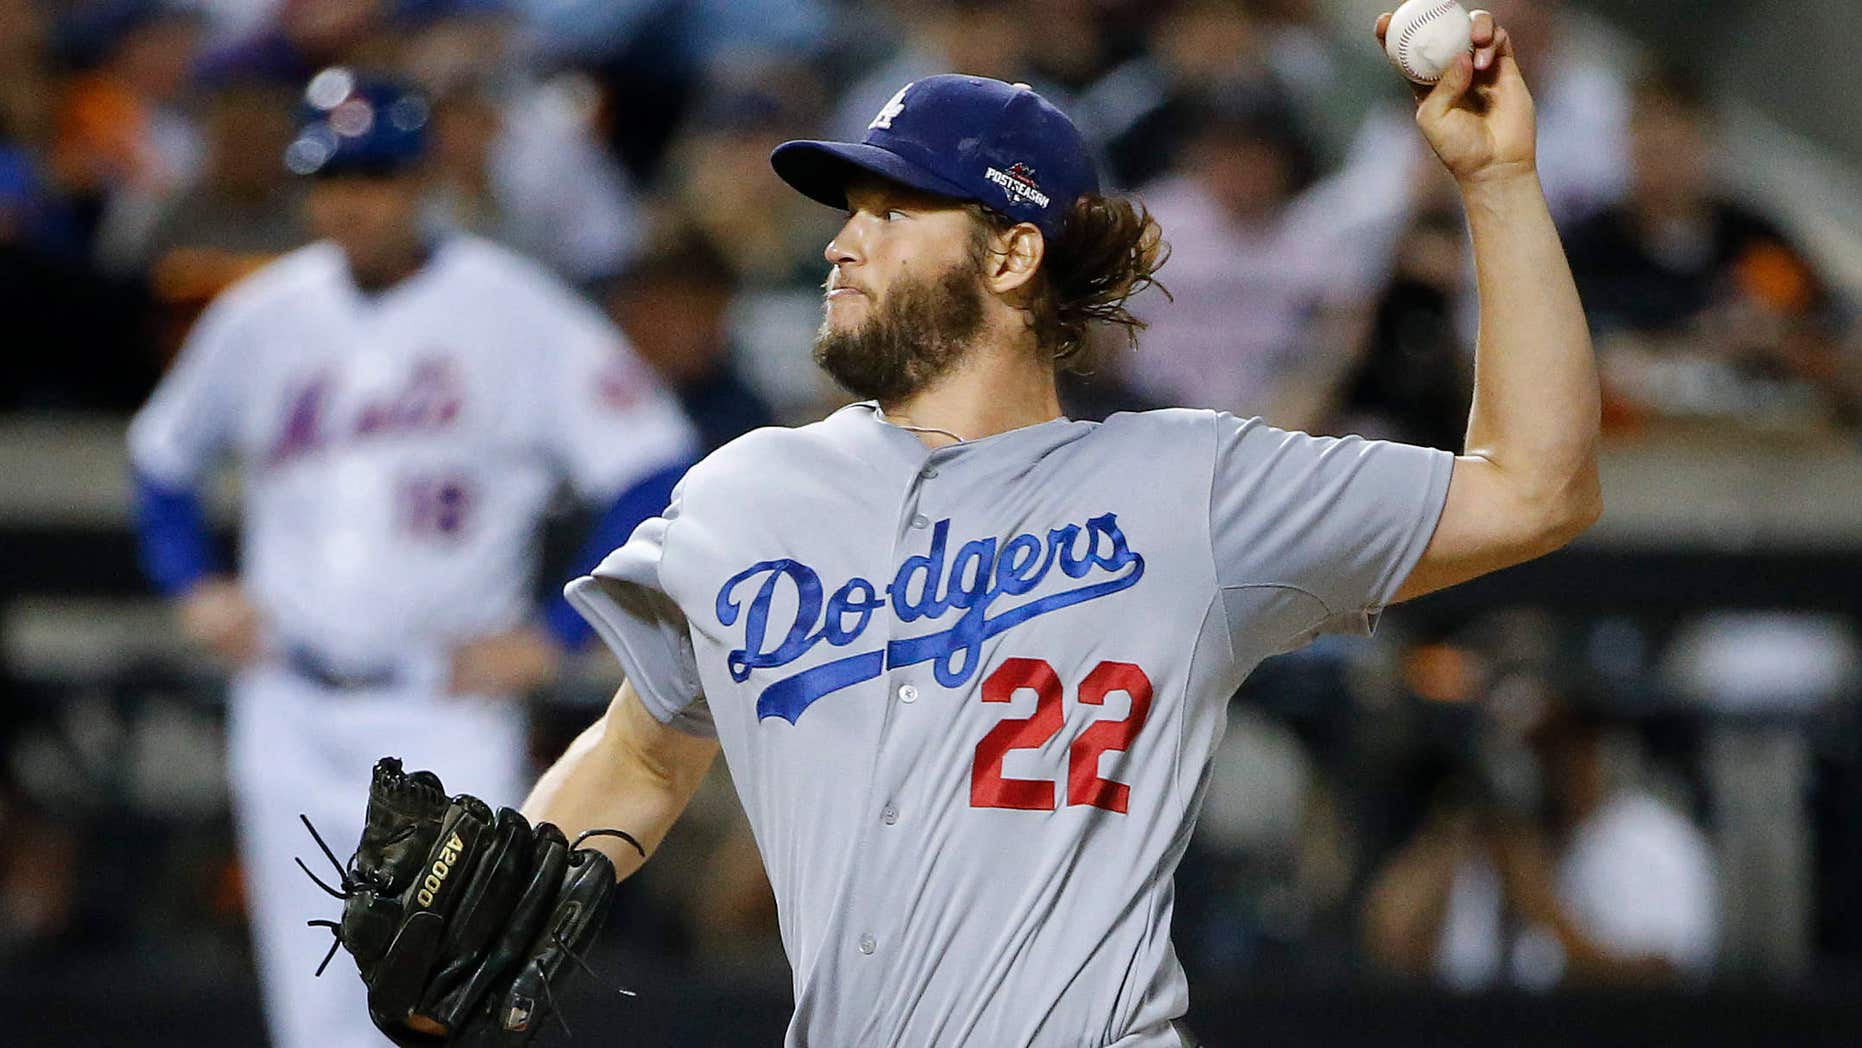 Dodgers beat Mets 3-1 behind dominant performance from Kershaw in Game